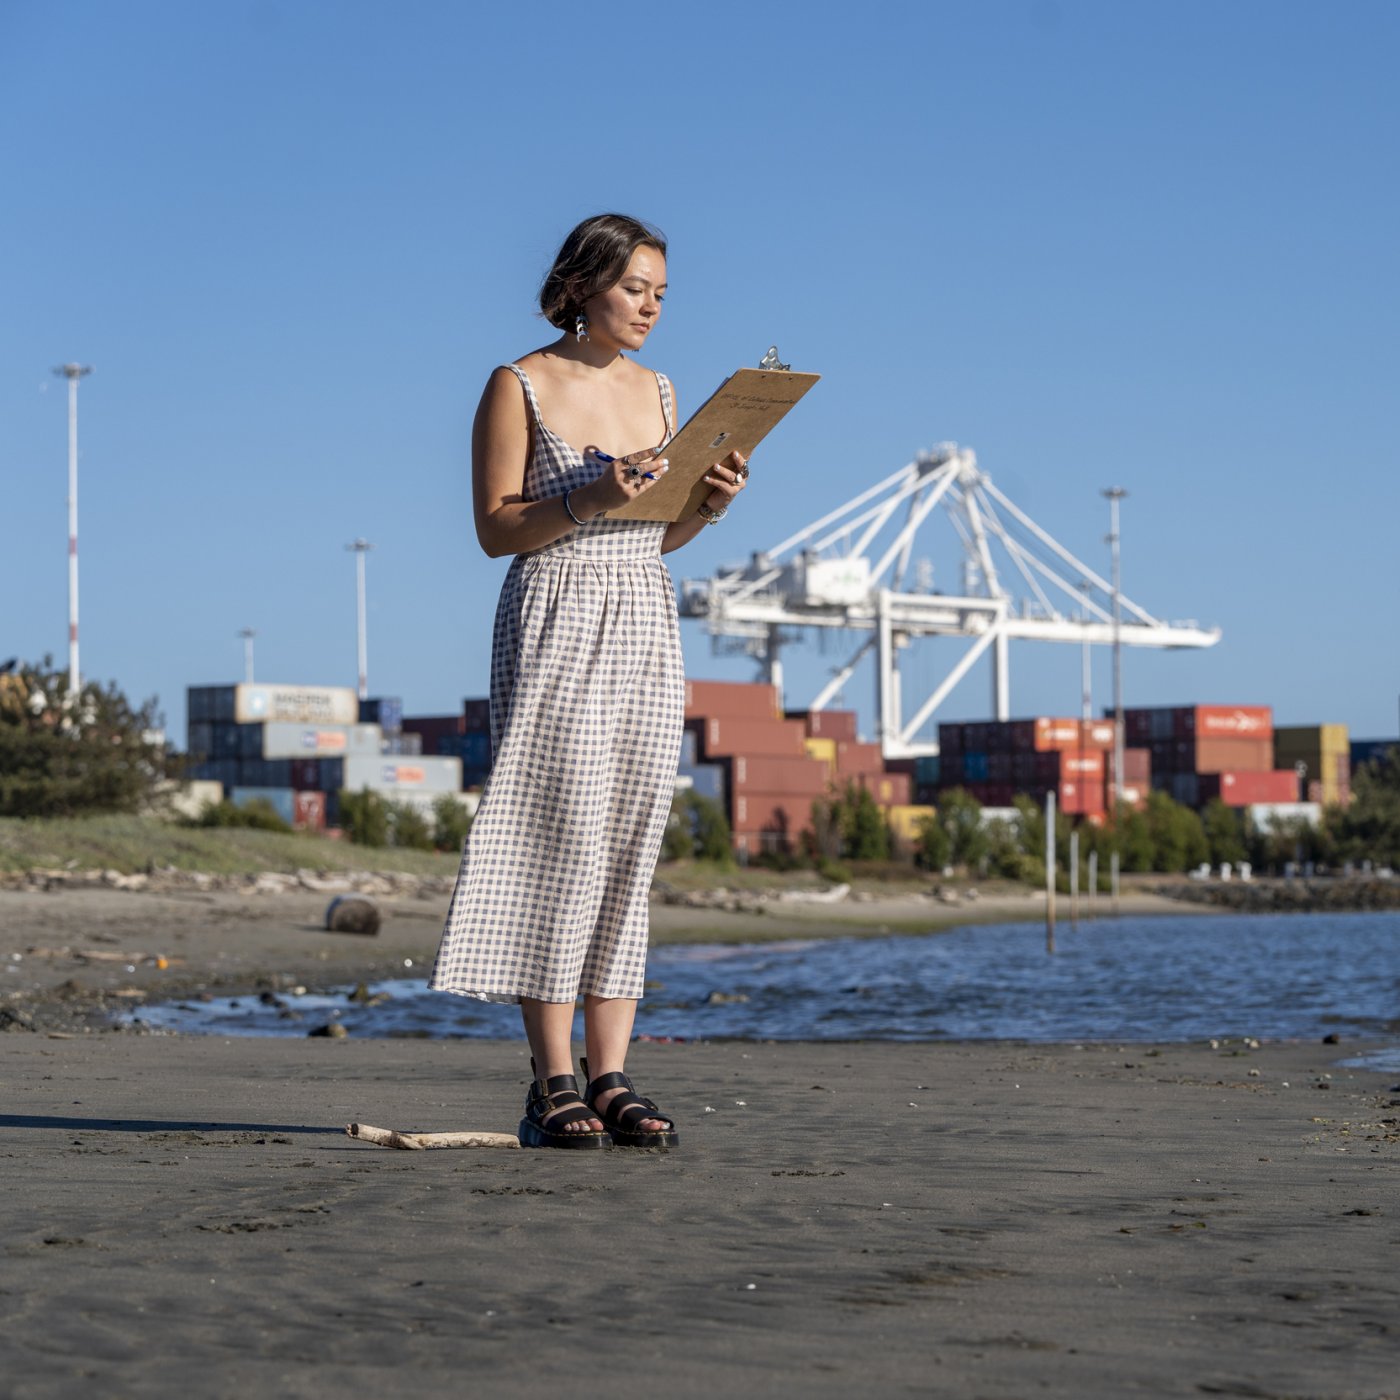 Desiree Sturrock '25 researching at the Port of Oakland